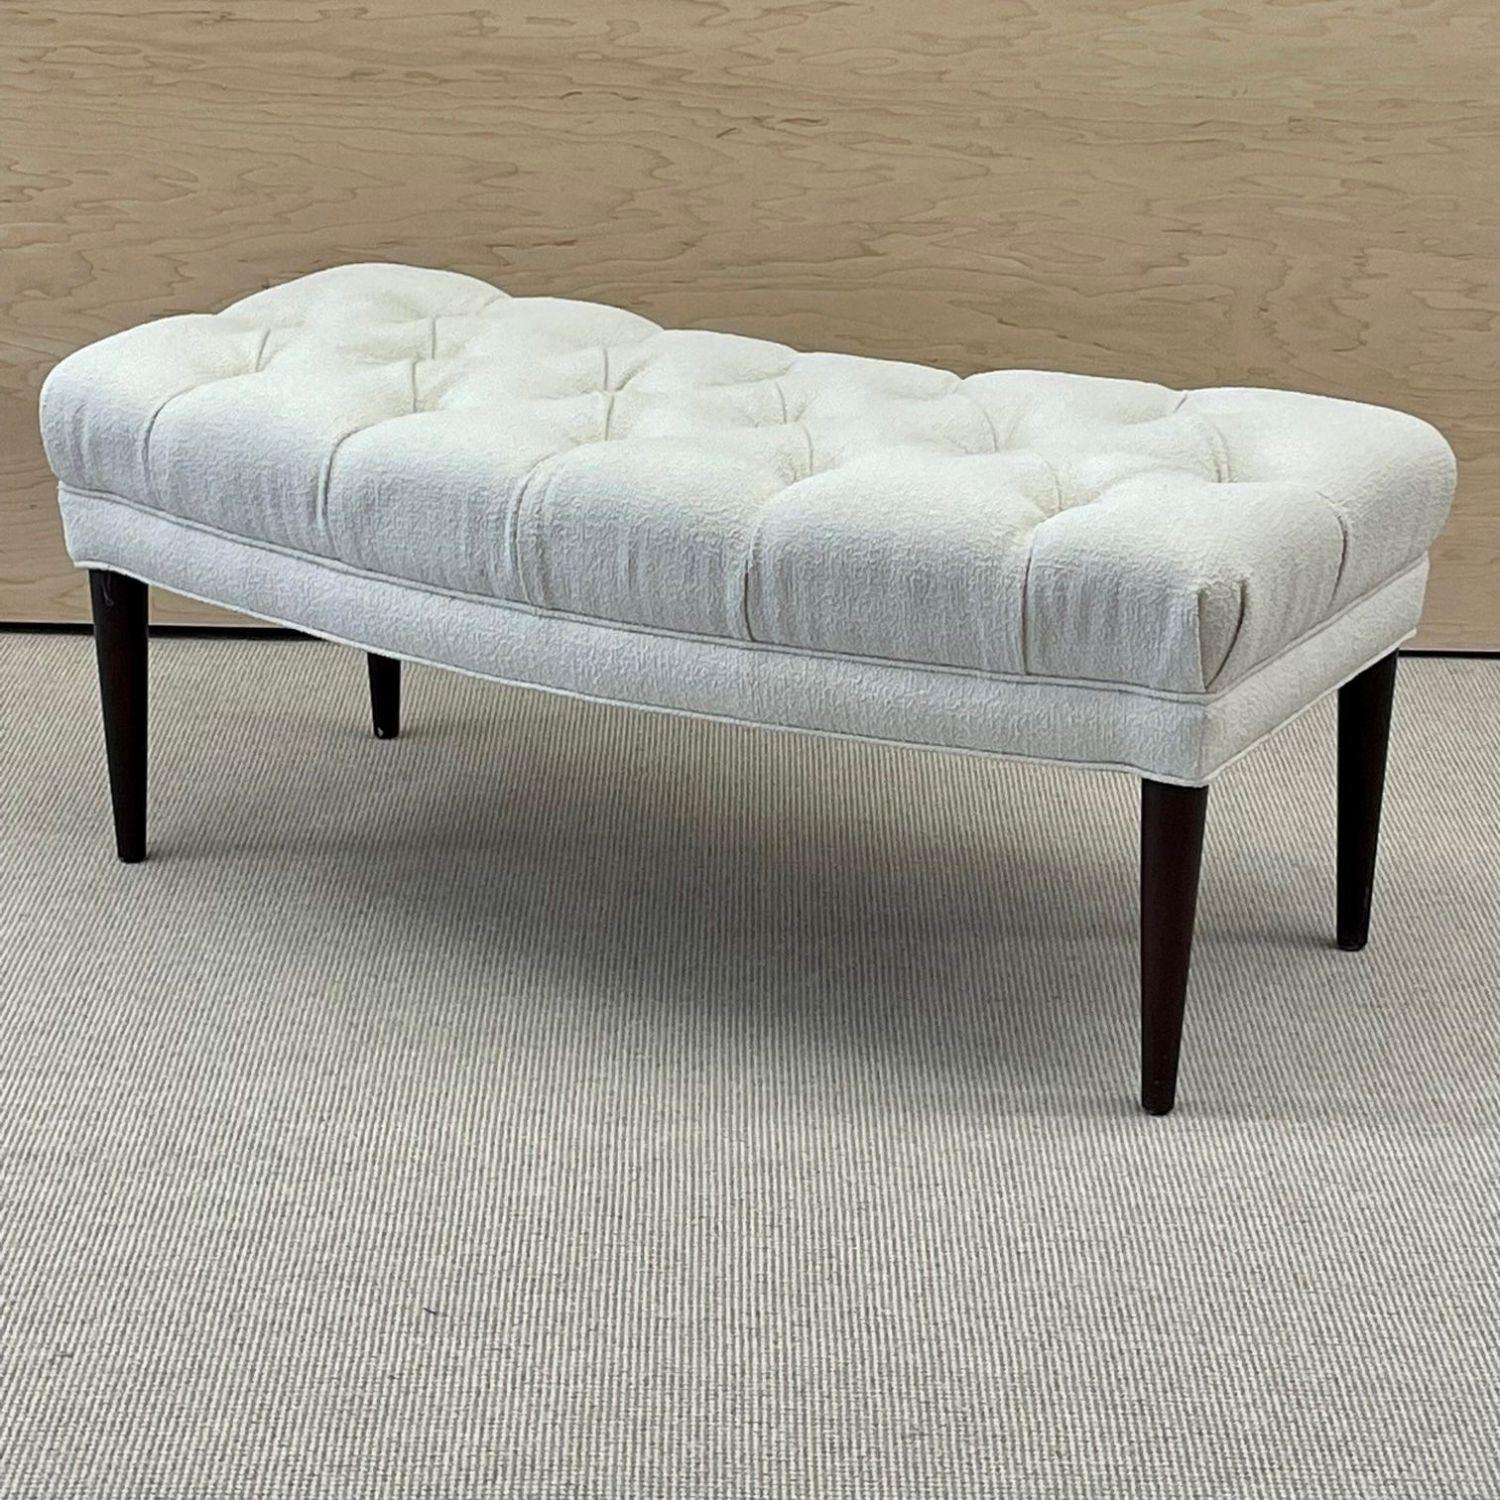 Mid-Century Modern Tufted bench, American Designer, Ebony Wood, Bouclé

Boomerang shaped mid-century bench by an unknow American designer. Tufted upper newly upholstered in a cozy white Bouclé sitting on four streamlined wooden legs in an ebony